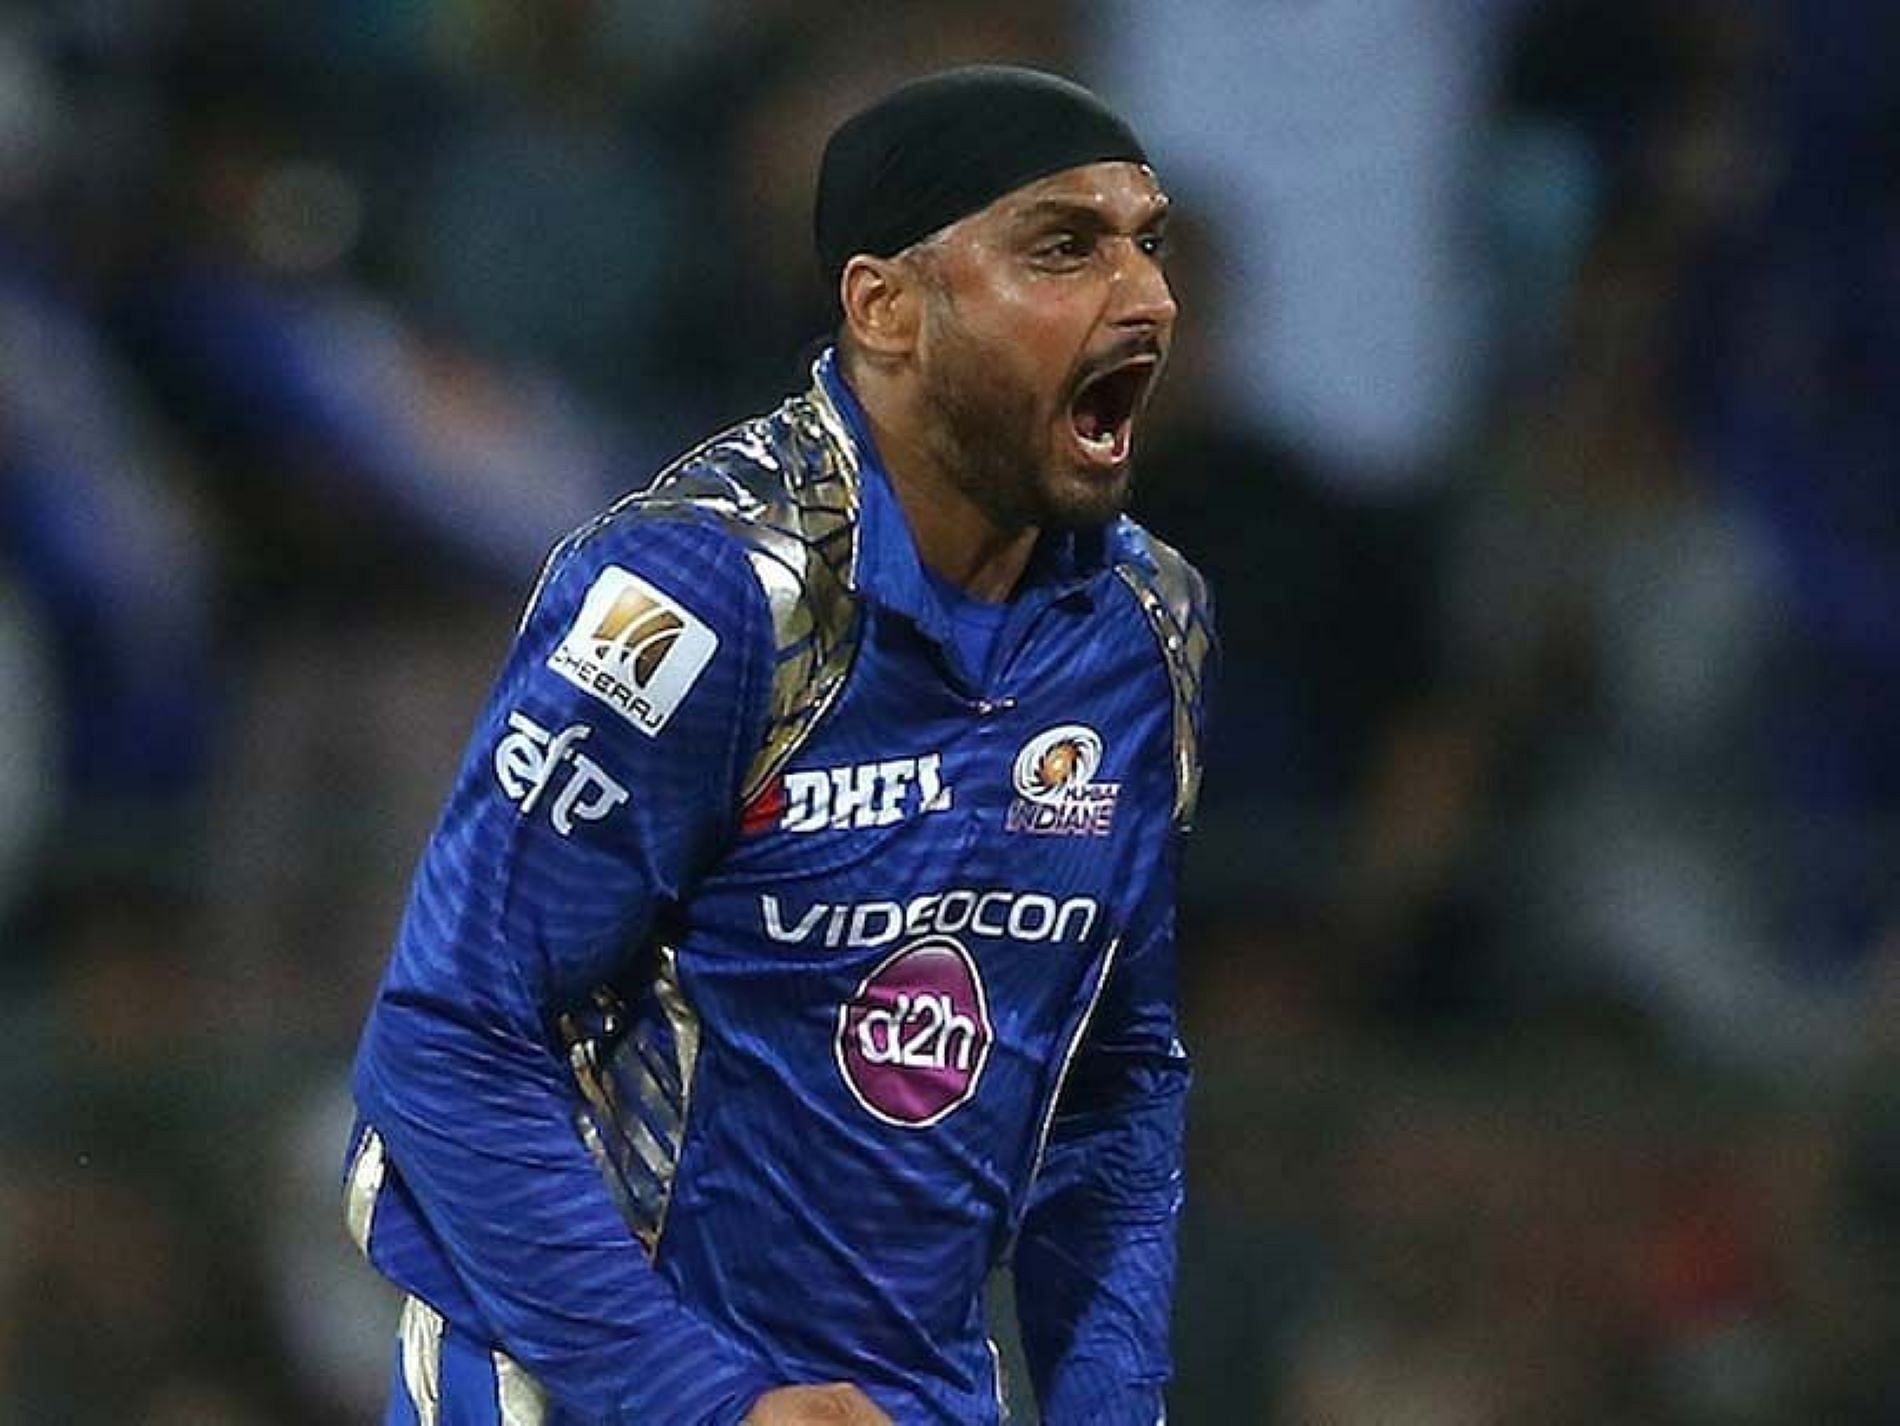 Harbhajan Singh picked up his best figures in the IPL against CSK in 2011